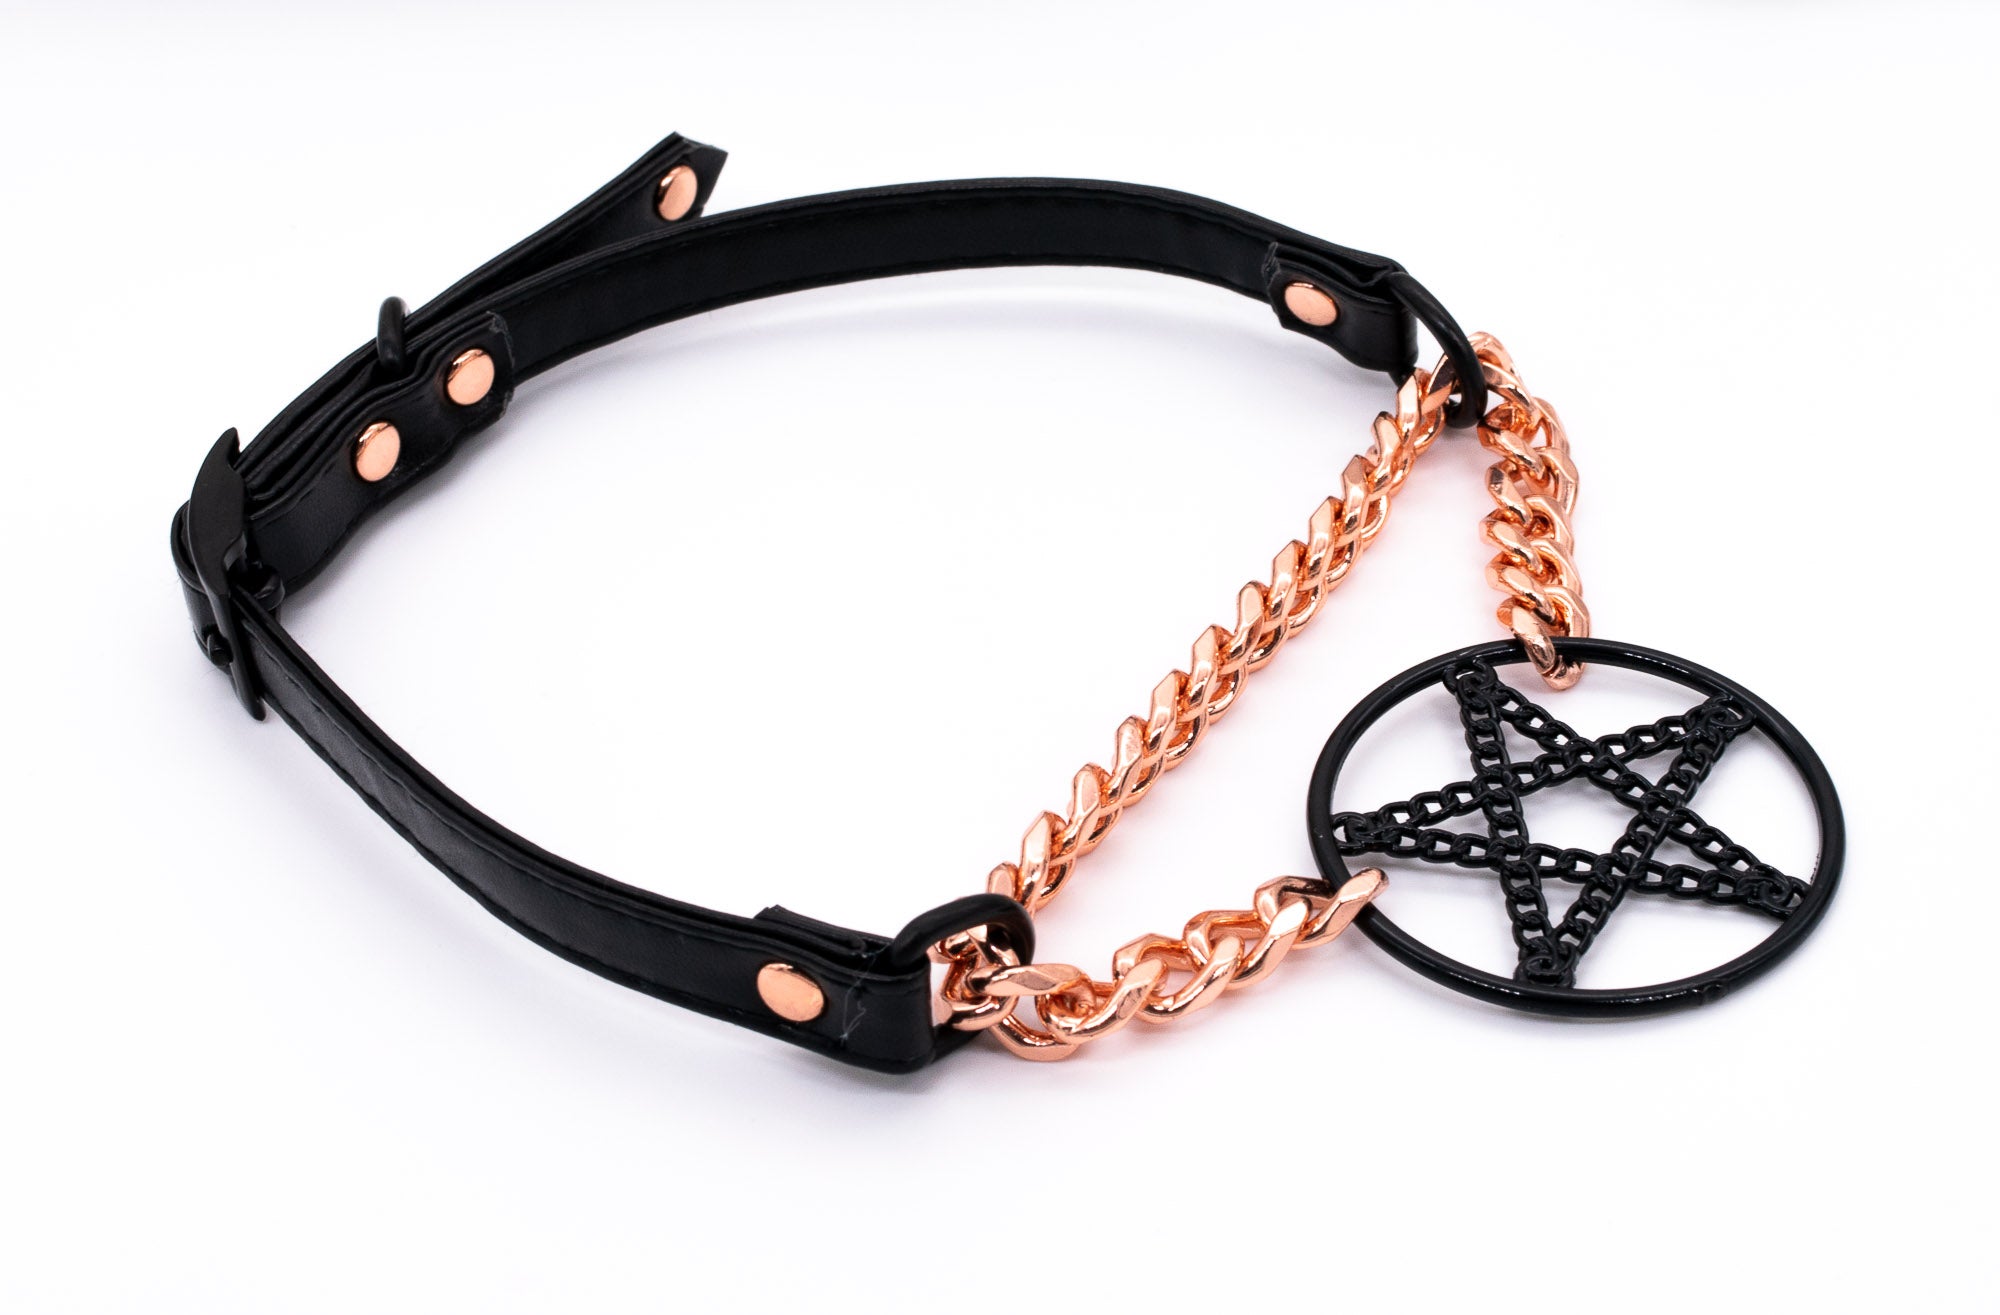 3/8" Black Inverted Pentacle Vegan Leather Martingale Collar in Rose Gold and Black